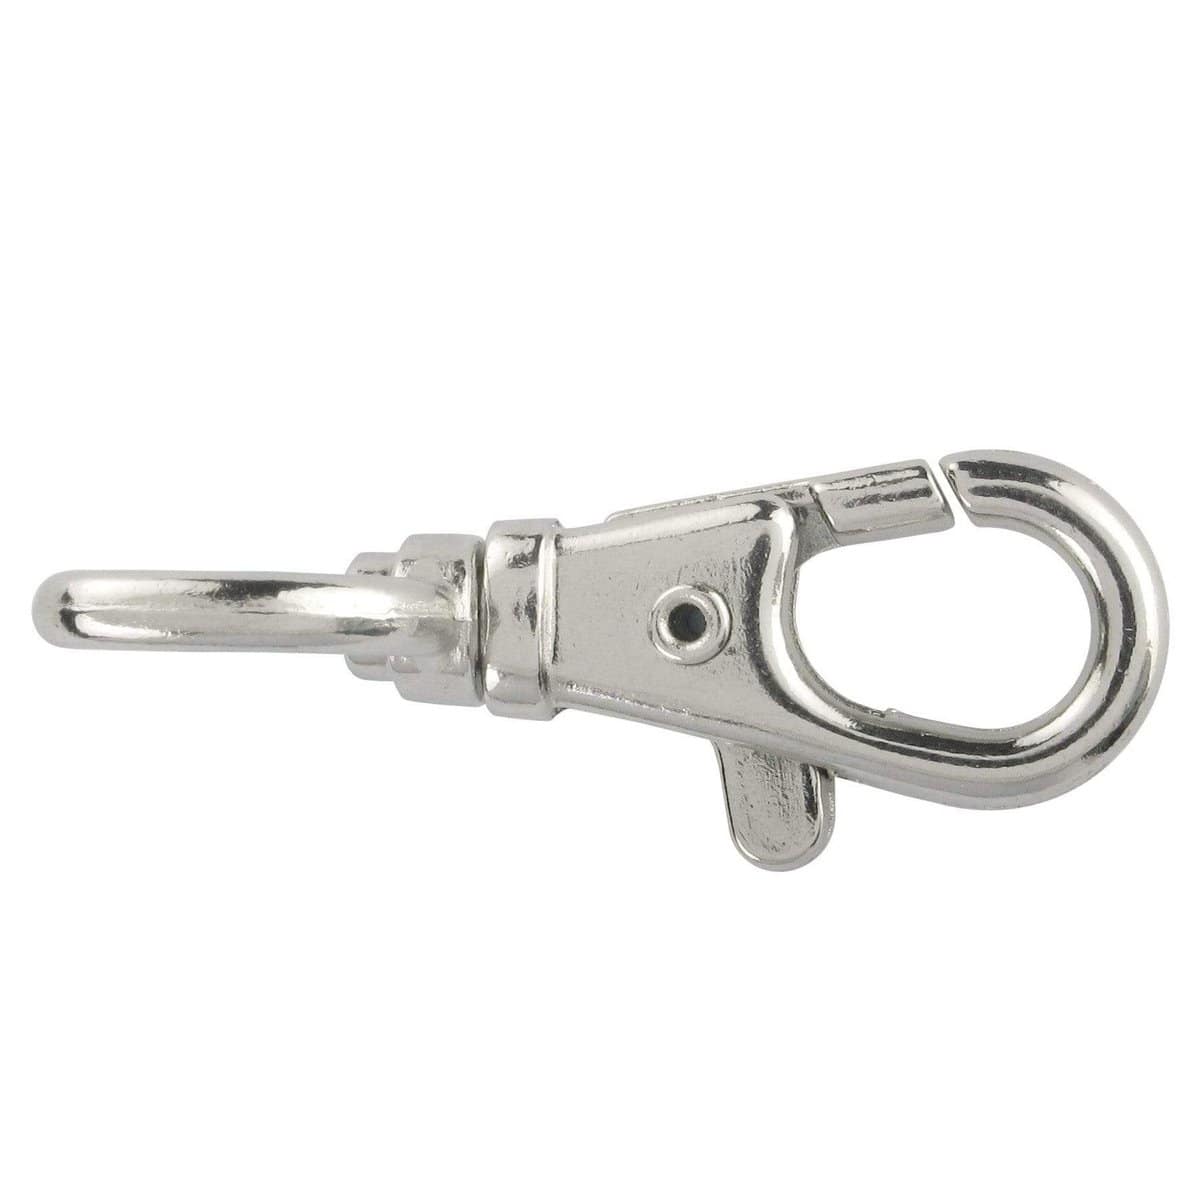  1 Inch Swivel Lobster Clasp Swivel Trigger Snap